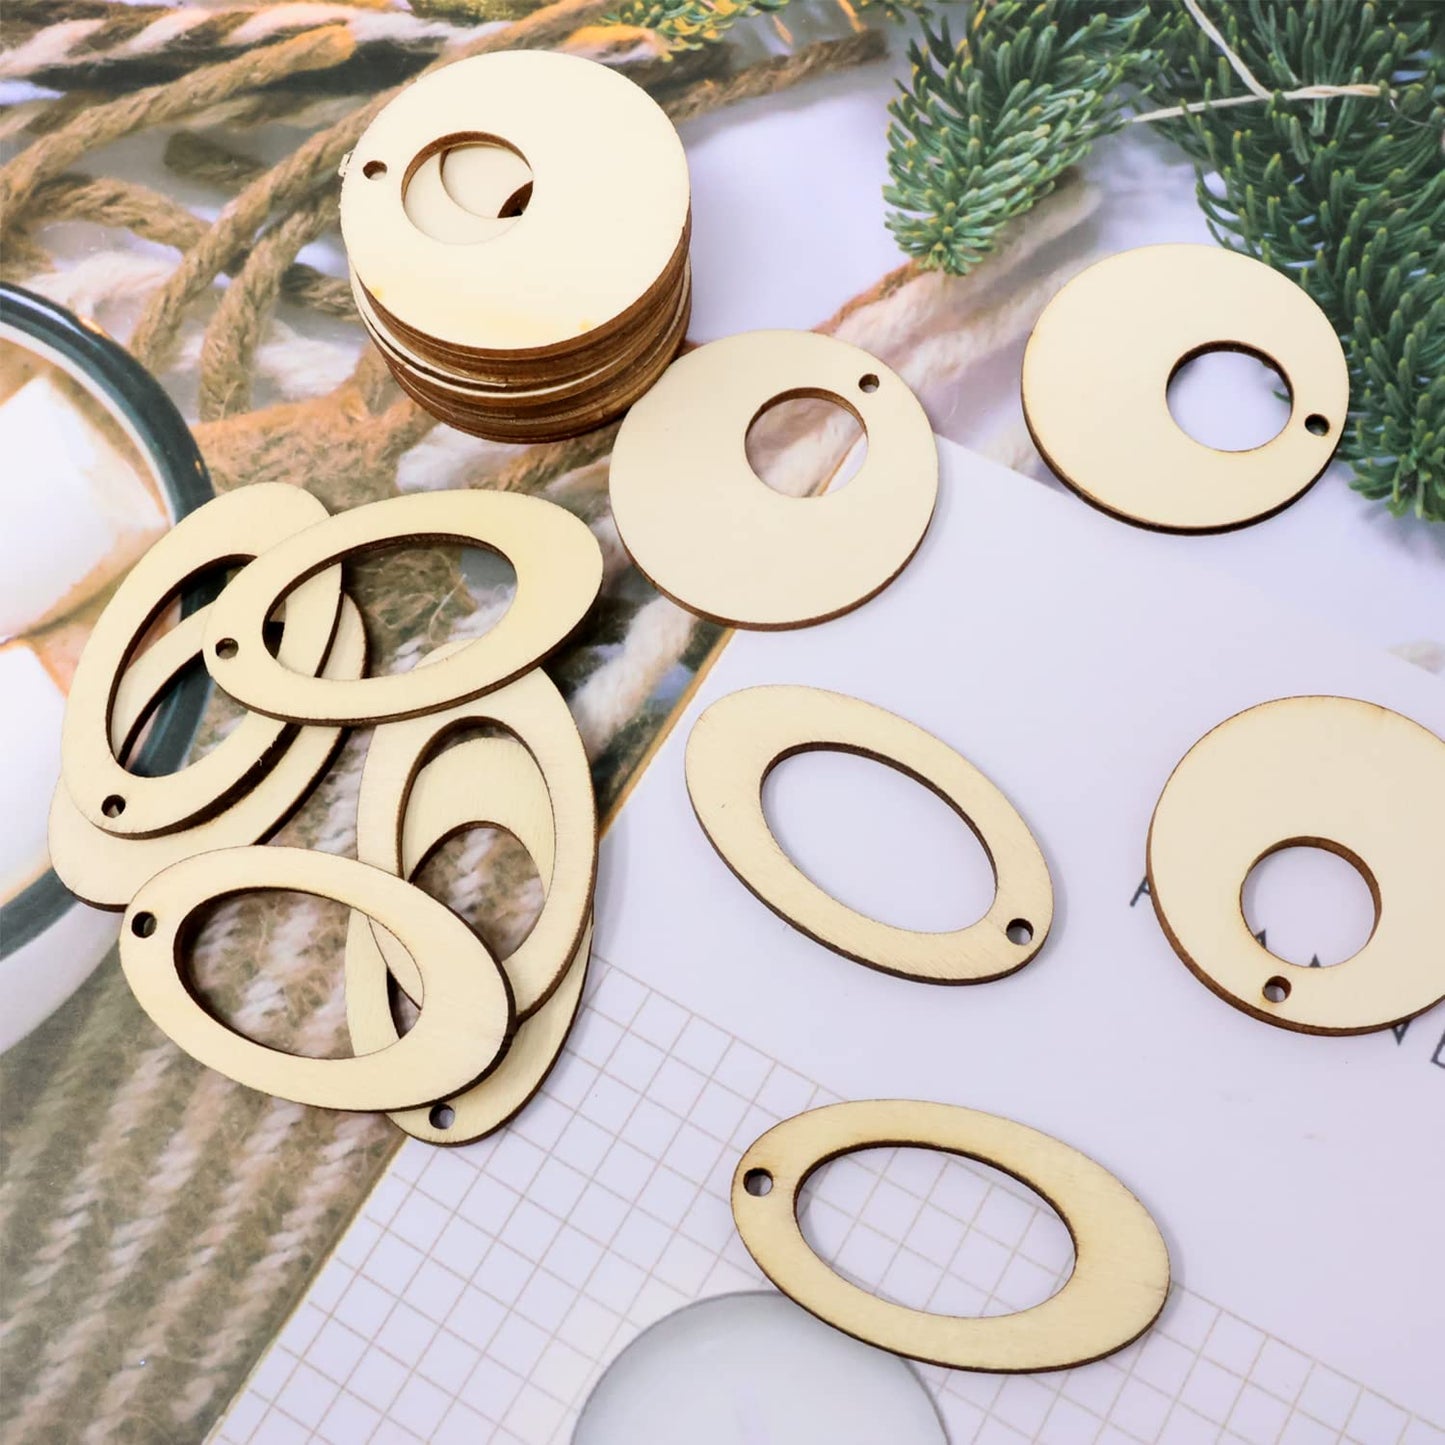 yueton 100PCS Round Oval Wooden Earring Pendant Geometric Hollow Wooden Hanging Ornaments Unfinished Blank Wood Pieces Wood Slices Wood Chips